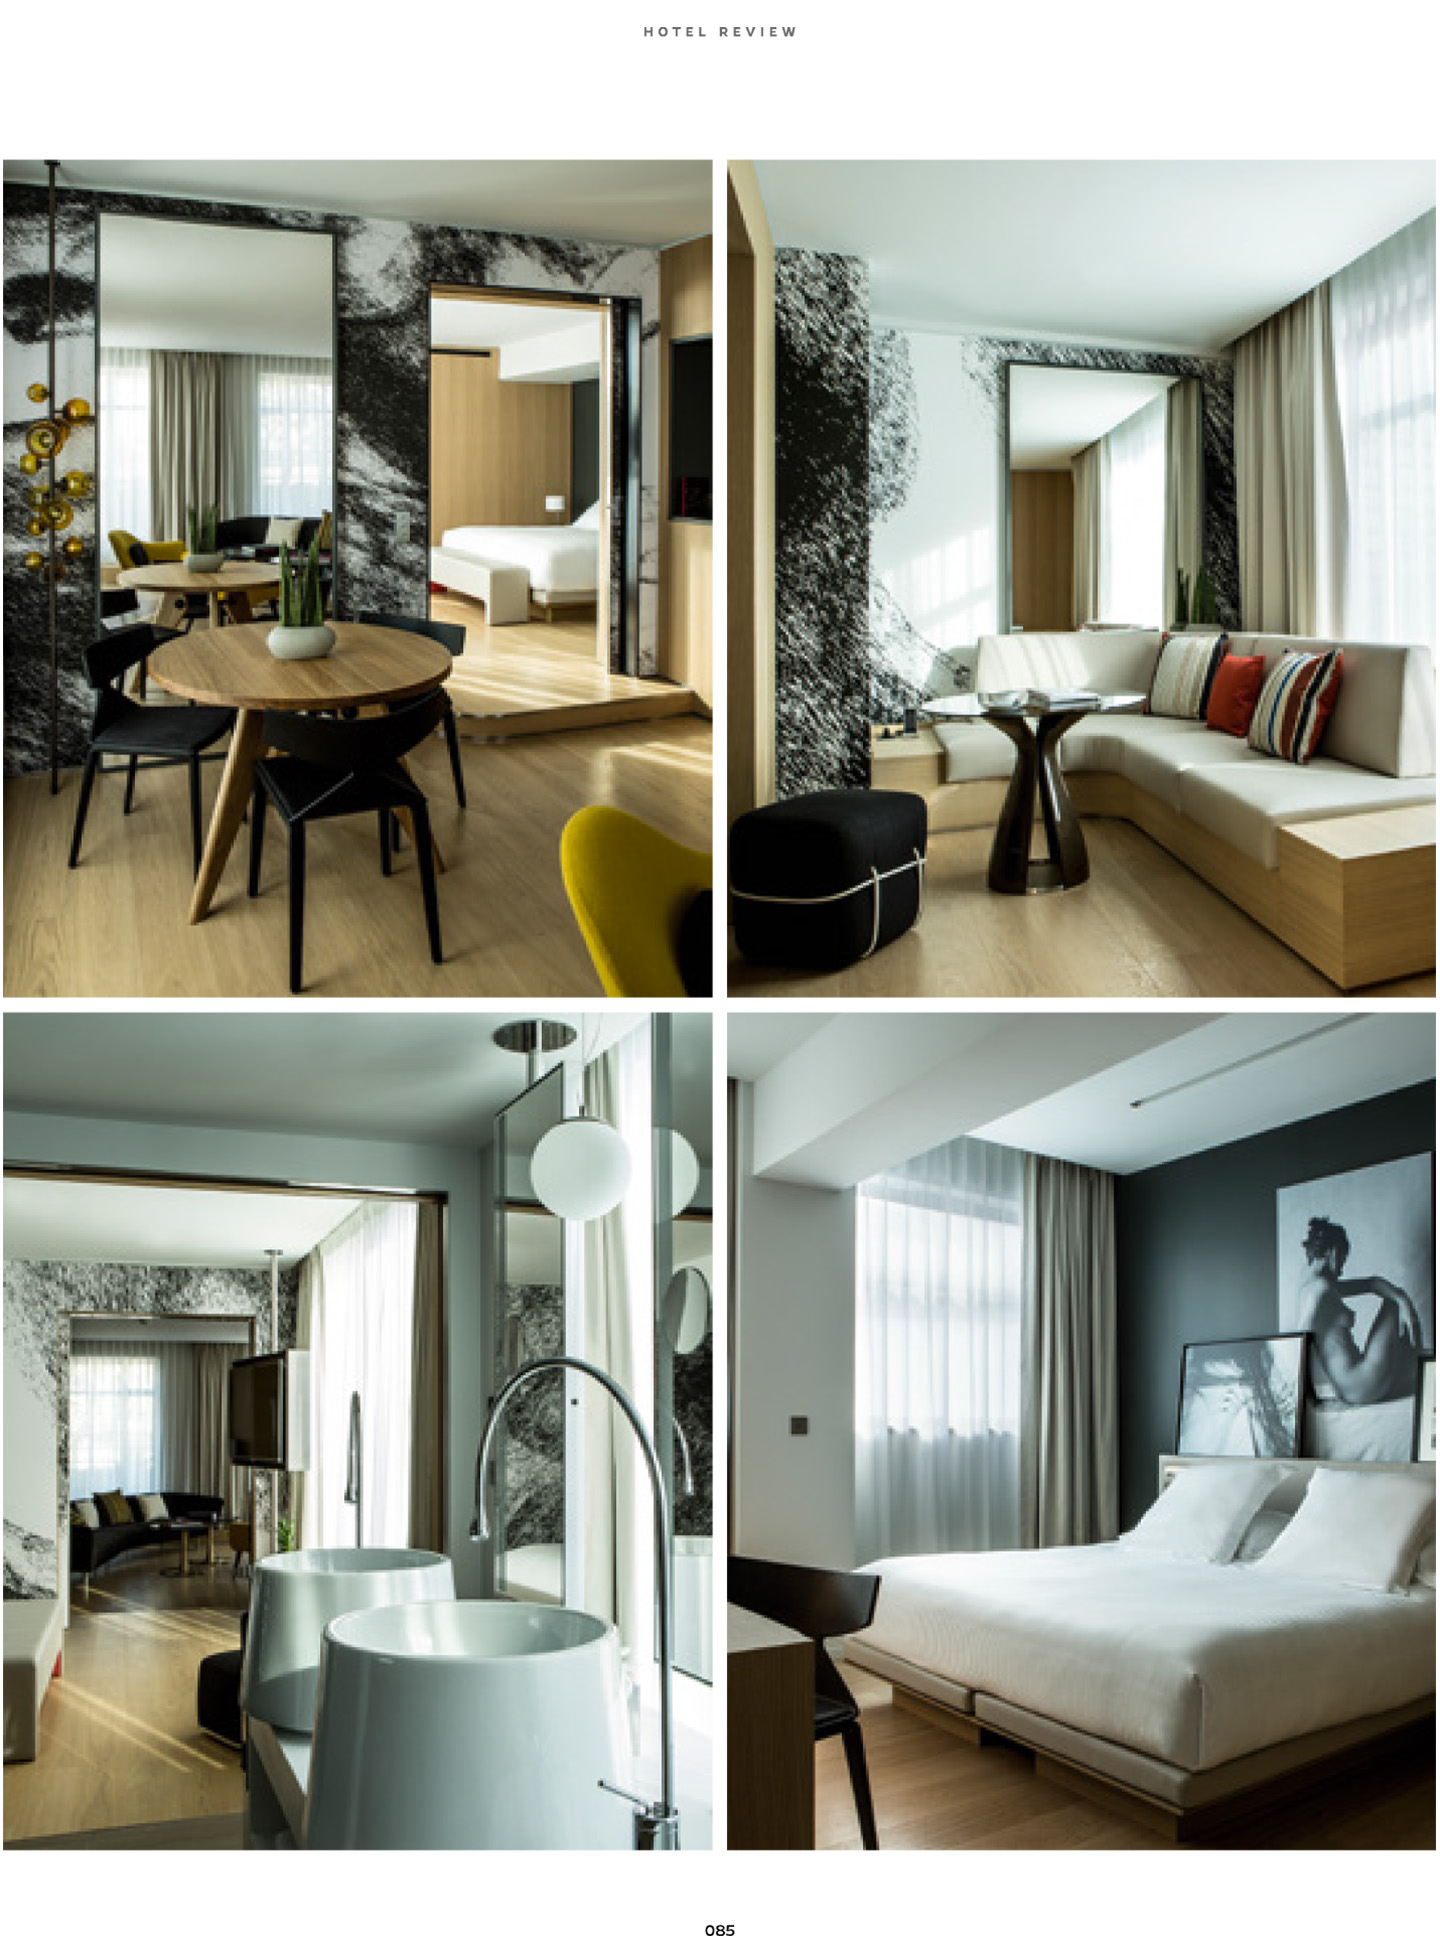 article on the hotel le cinq codet in sleeper magazine by the interior design studio jean-philippe nuel